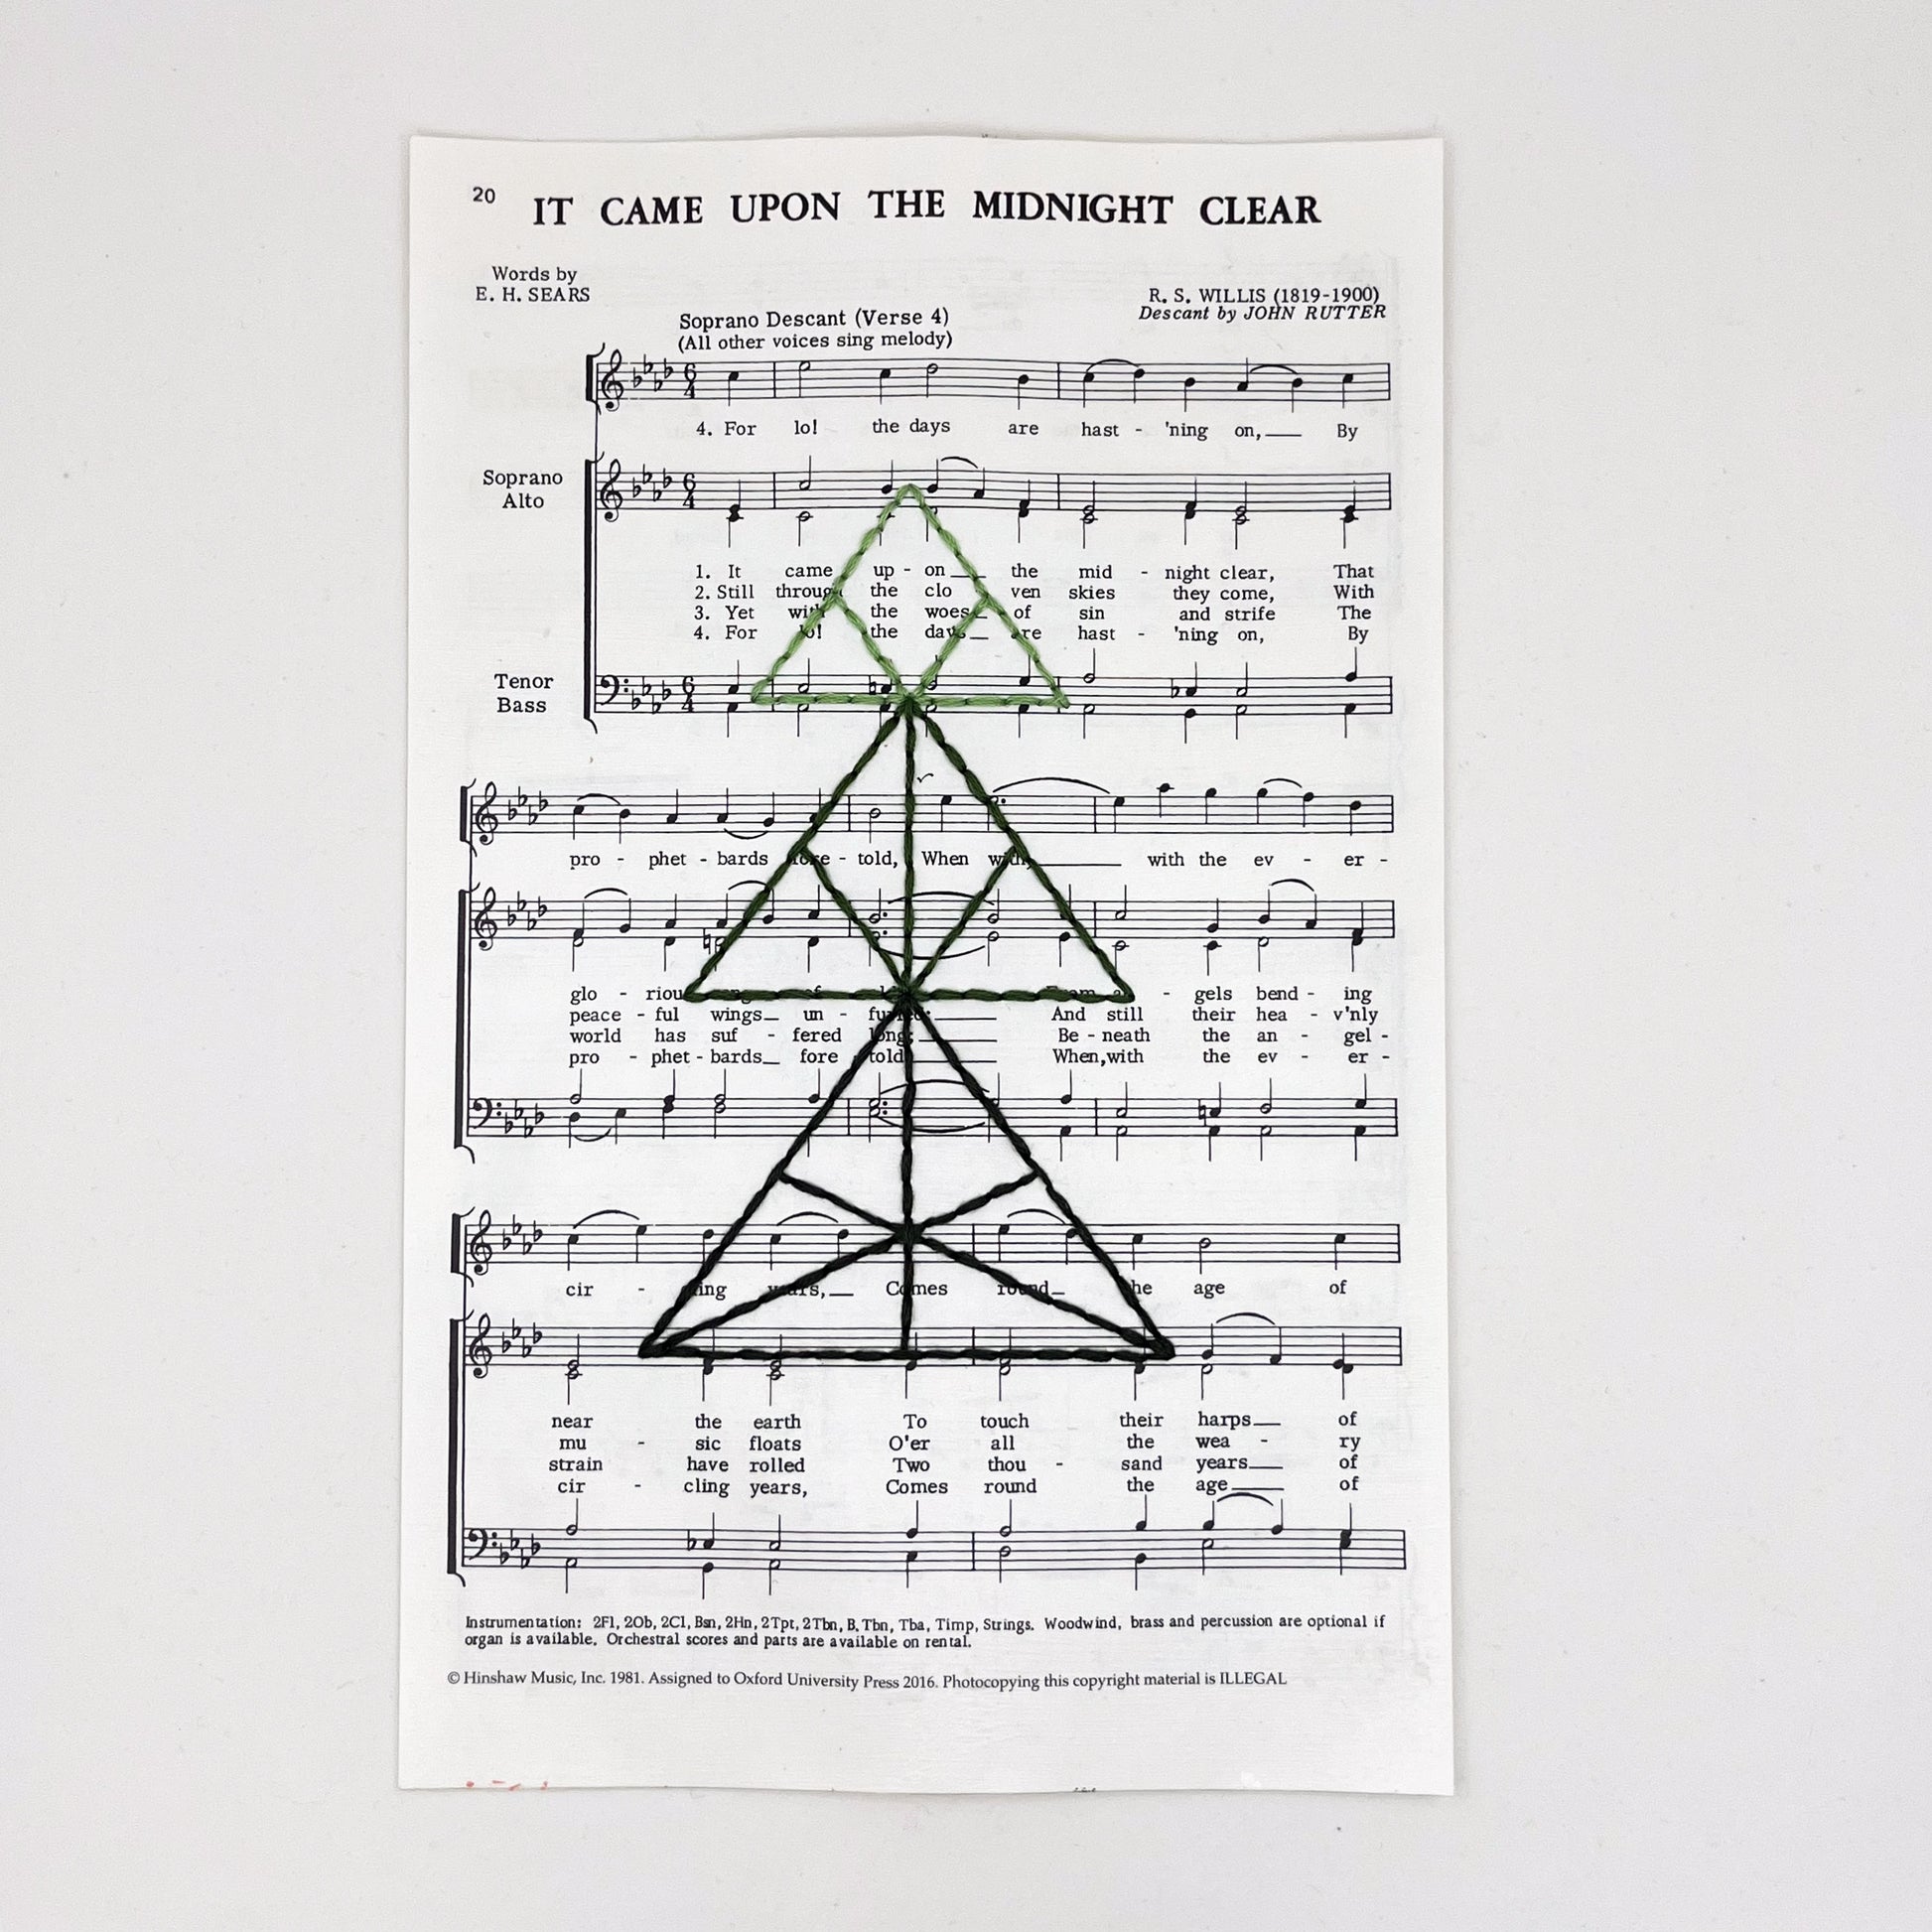 sheet music from the Christmas song "It Came Upon the Midnight Clear", hand stitched over with a Christmas tree made from triangles, in shades of green thread